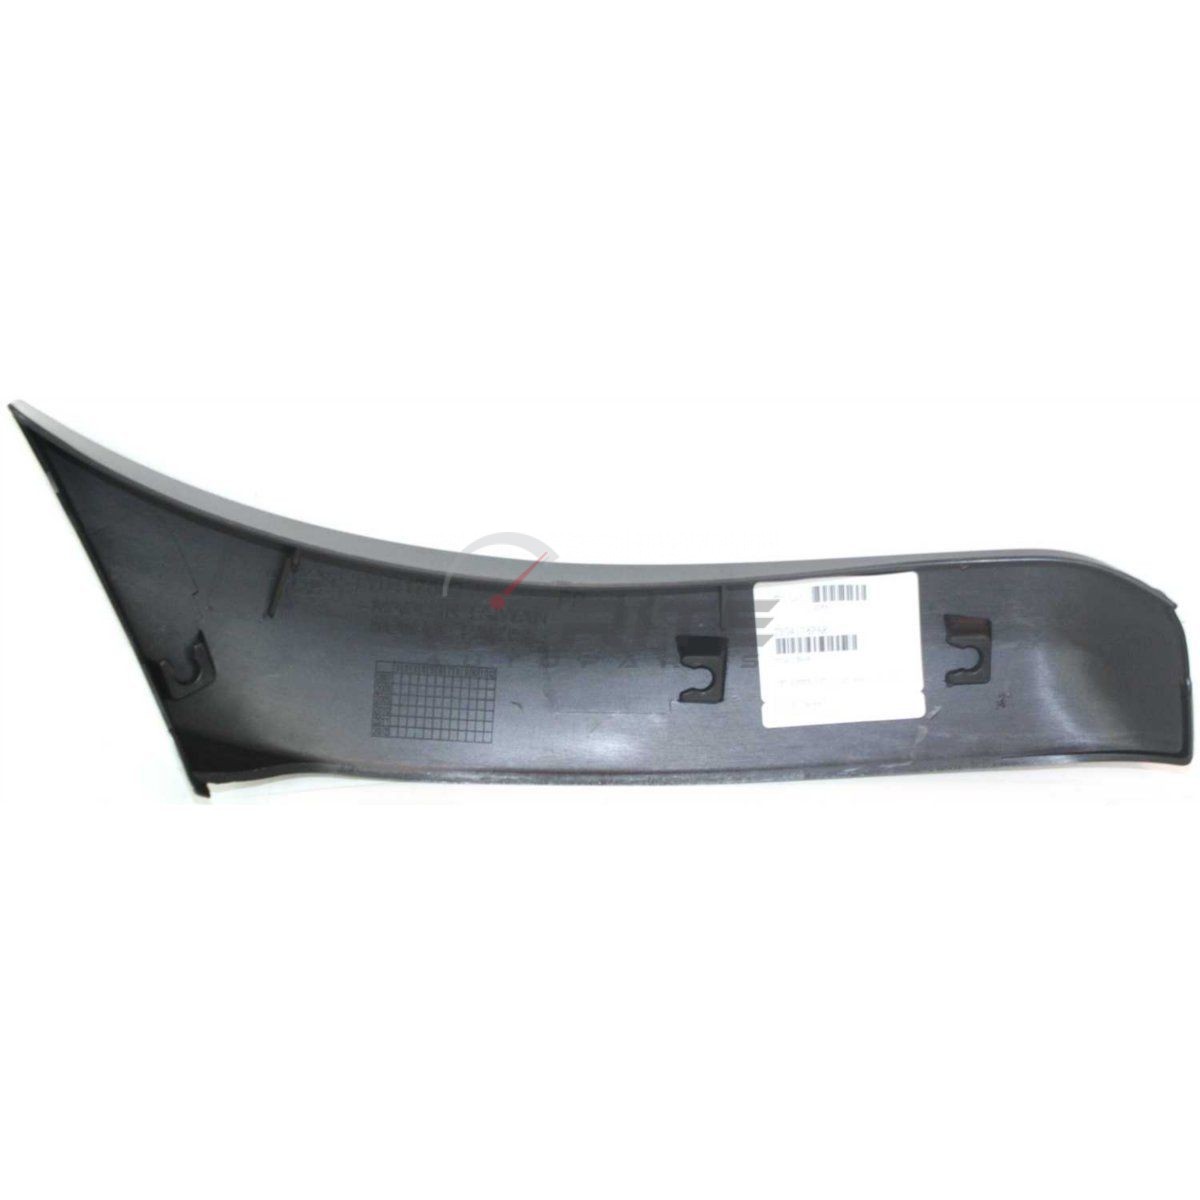 NEW 01-05 FITS TOYOTA RAV4 FRONT RIGHT BUMPER END PRIMED 5211242050C0 TO1005169